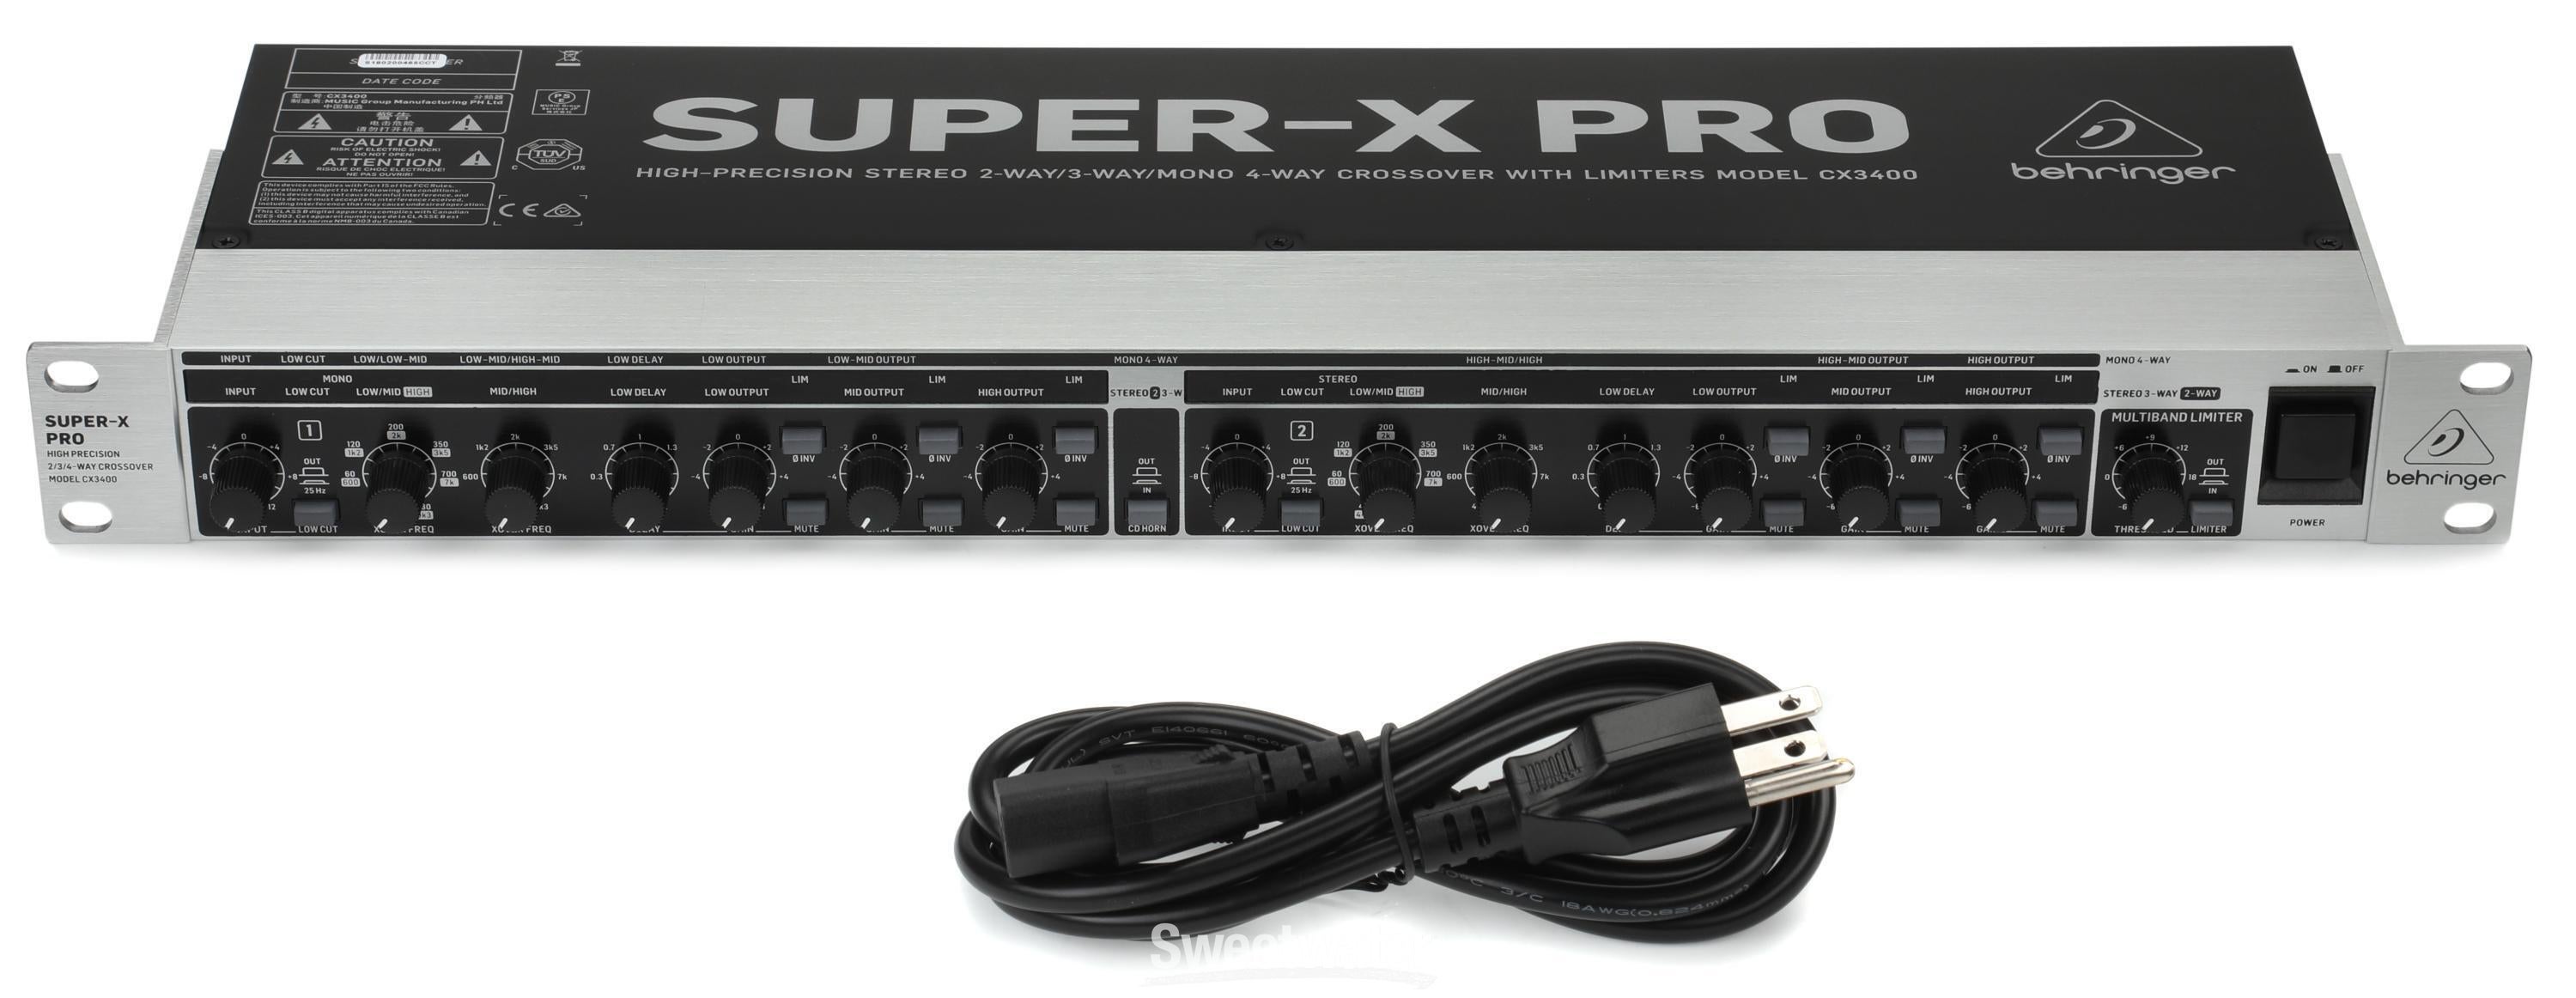 Behringer Super-X Pro CX3400 V2 Multi-channel Crossover with Limiters